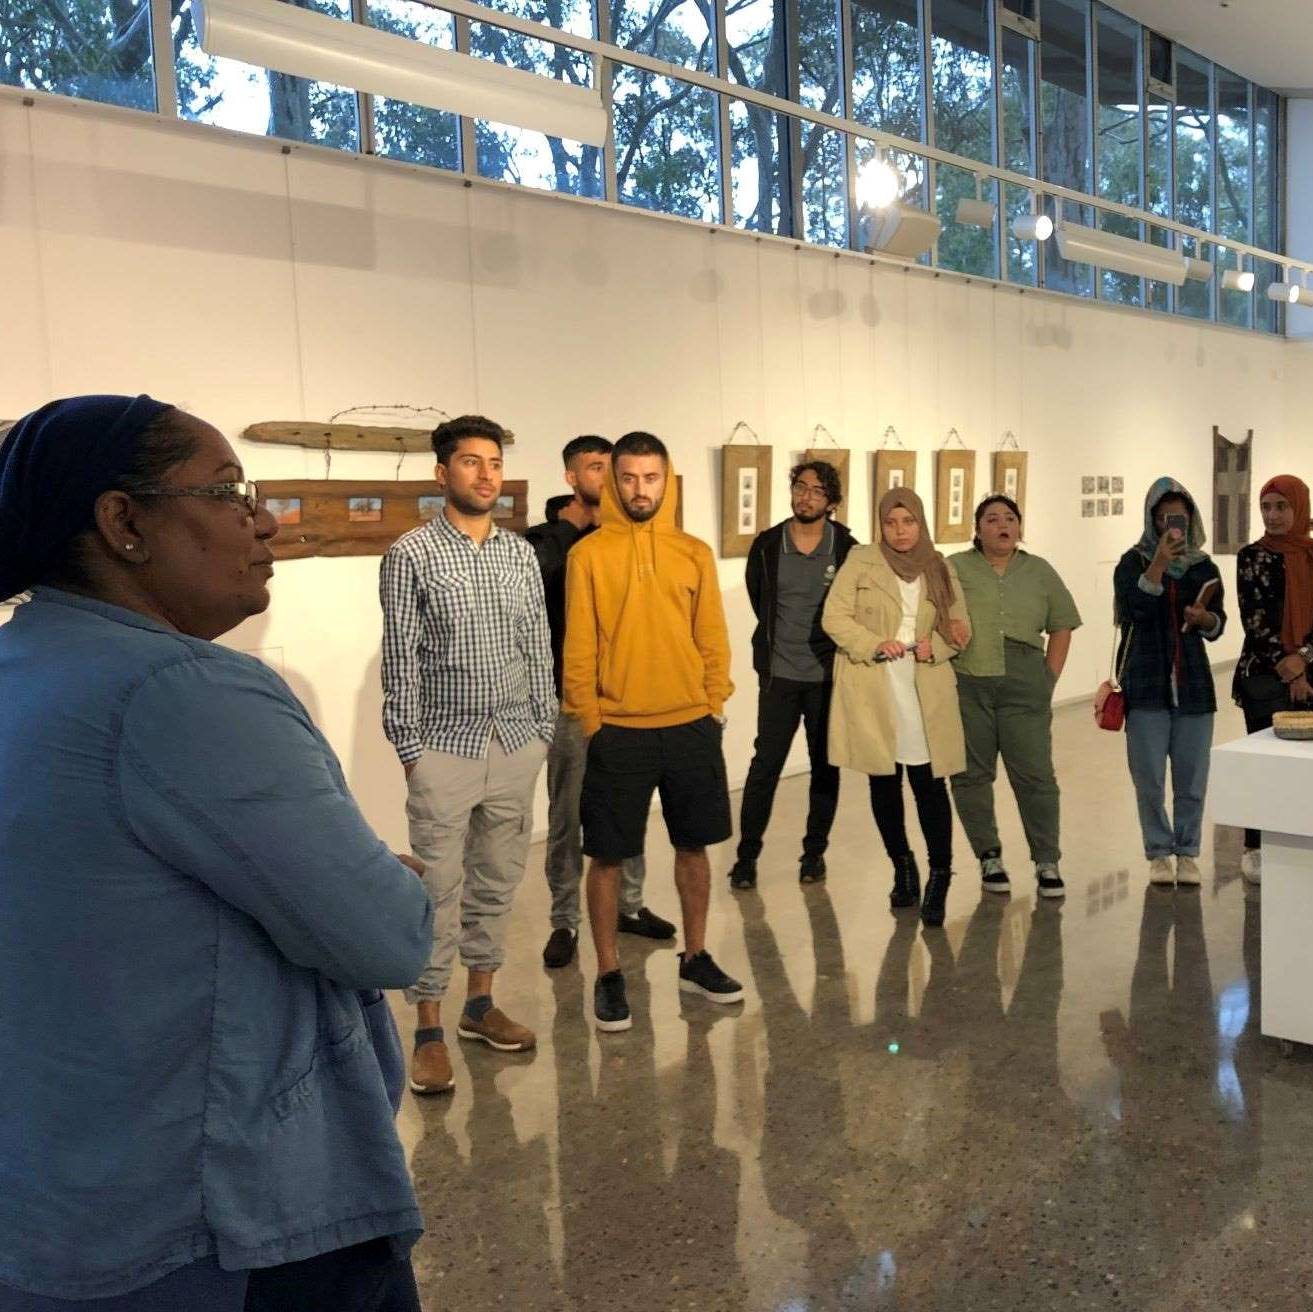 A woman speaking in an art gallery to a group of young men and women^empty:{ds__assetid^as_asset:asset_name}